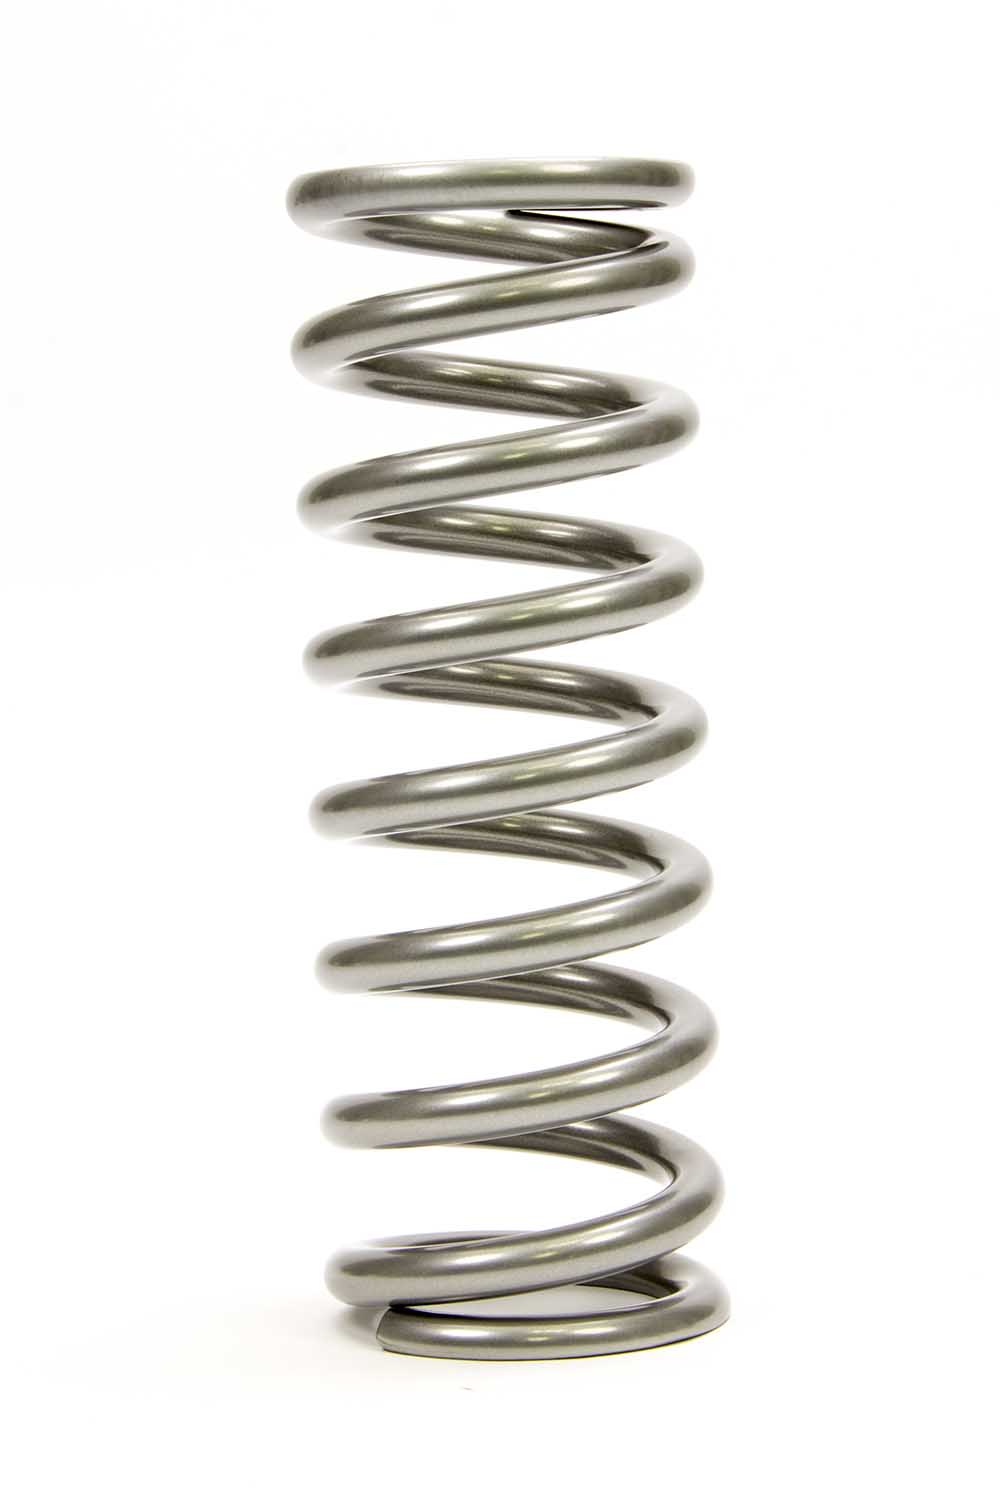 Shop for QA1 PERFORMANCE PRODUCTS Coil Springs :: Racecar Engineering